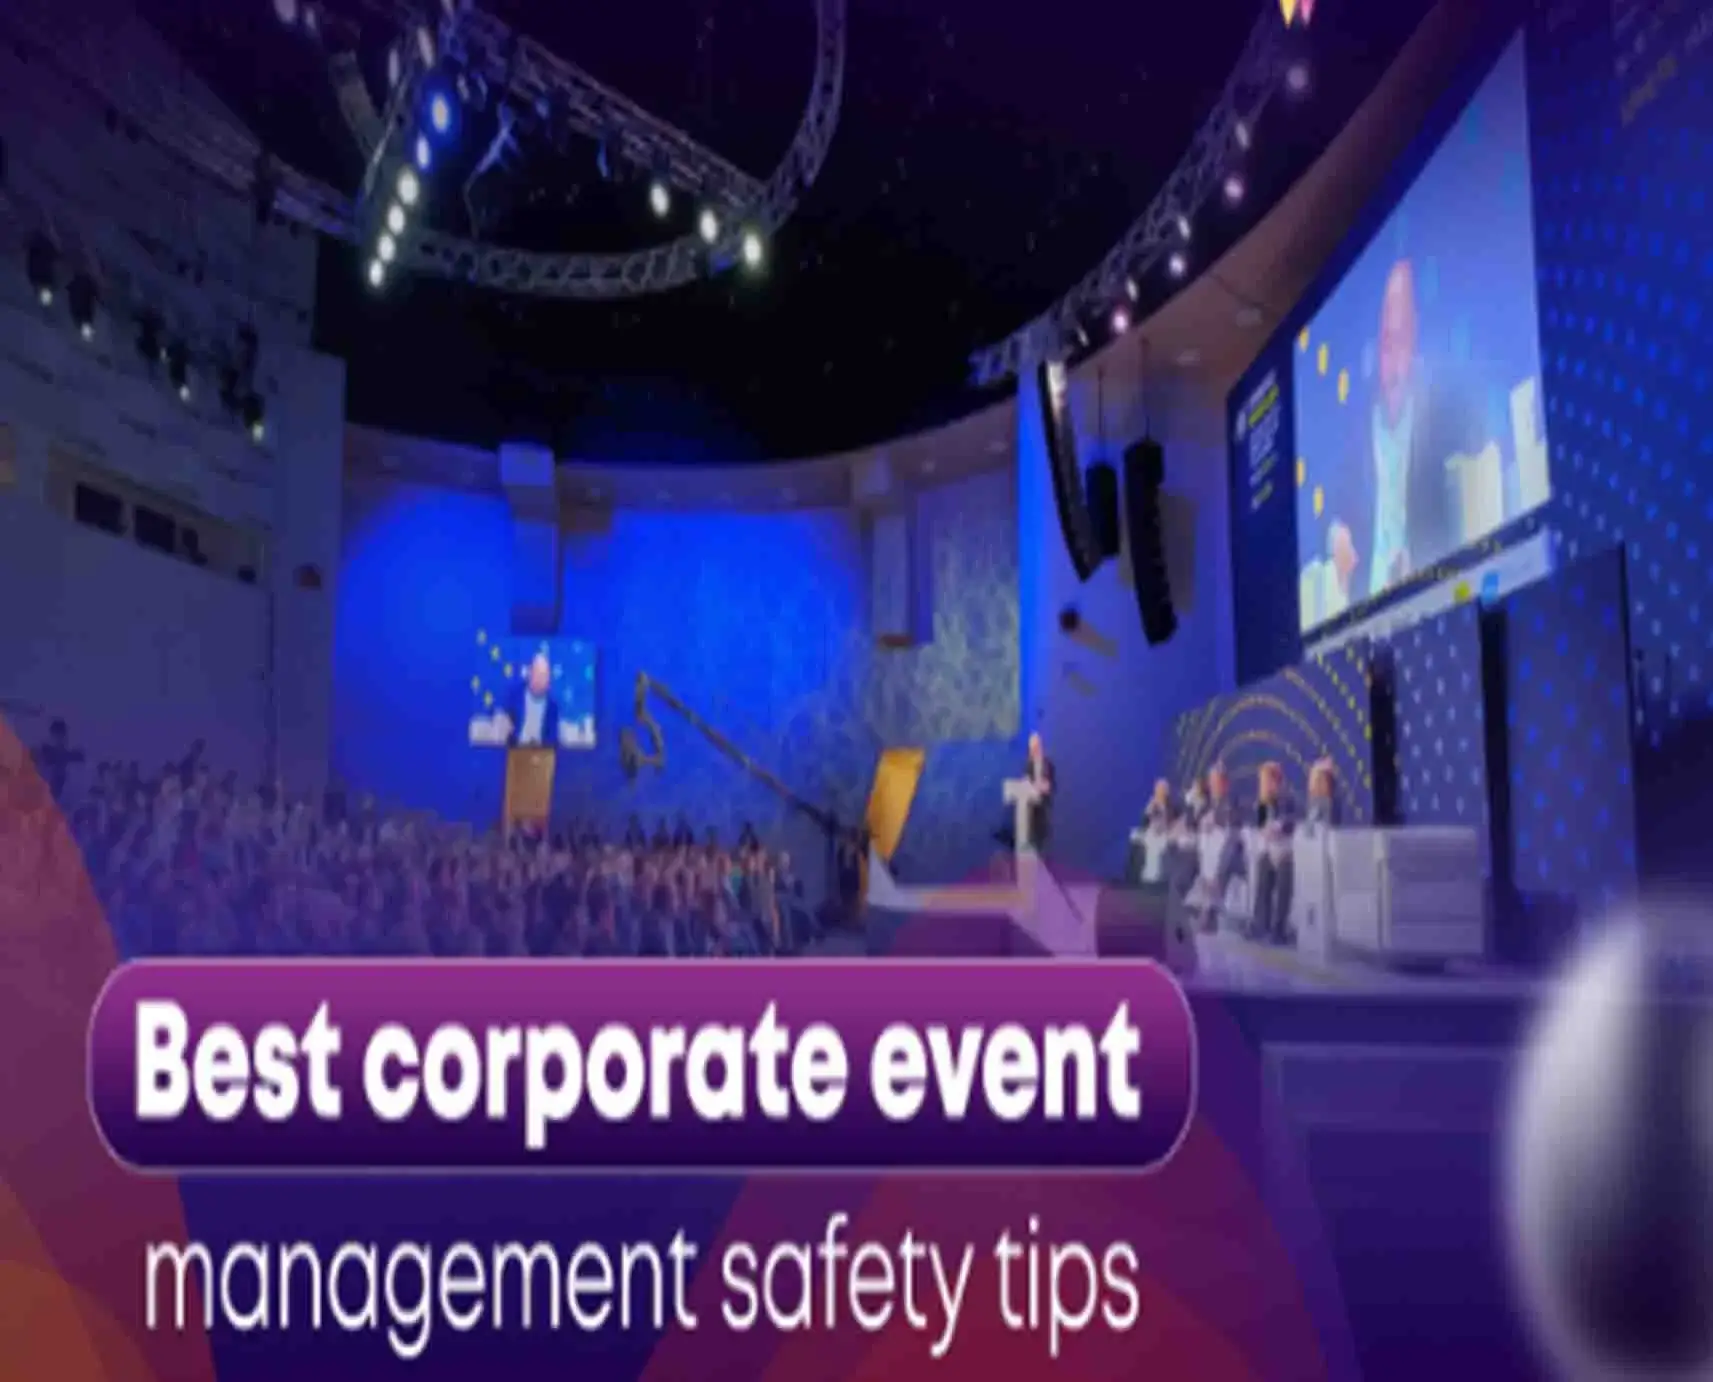 Tips for Managing Corporate Events